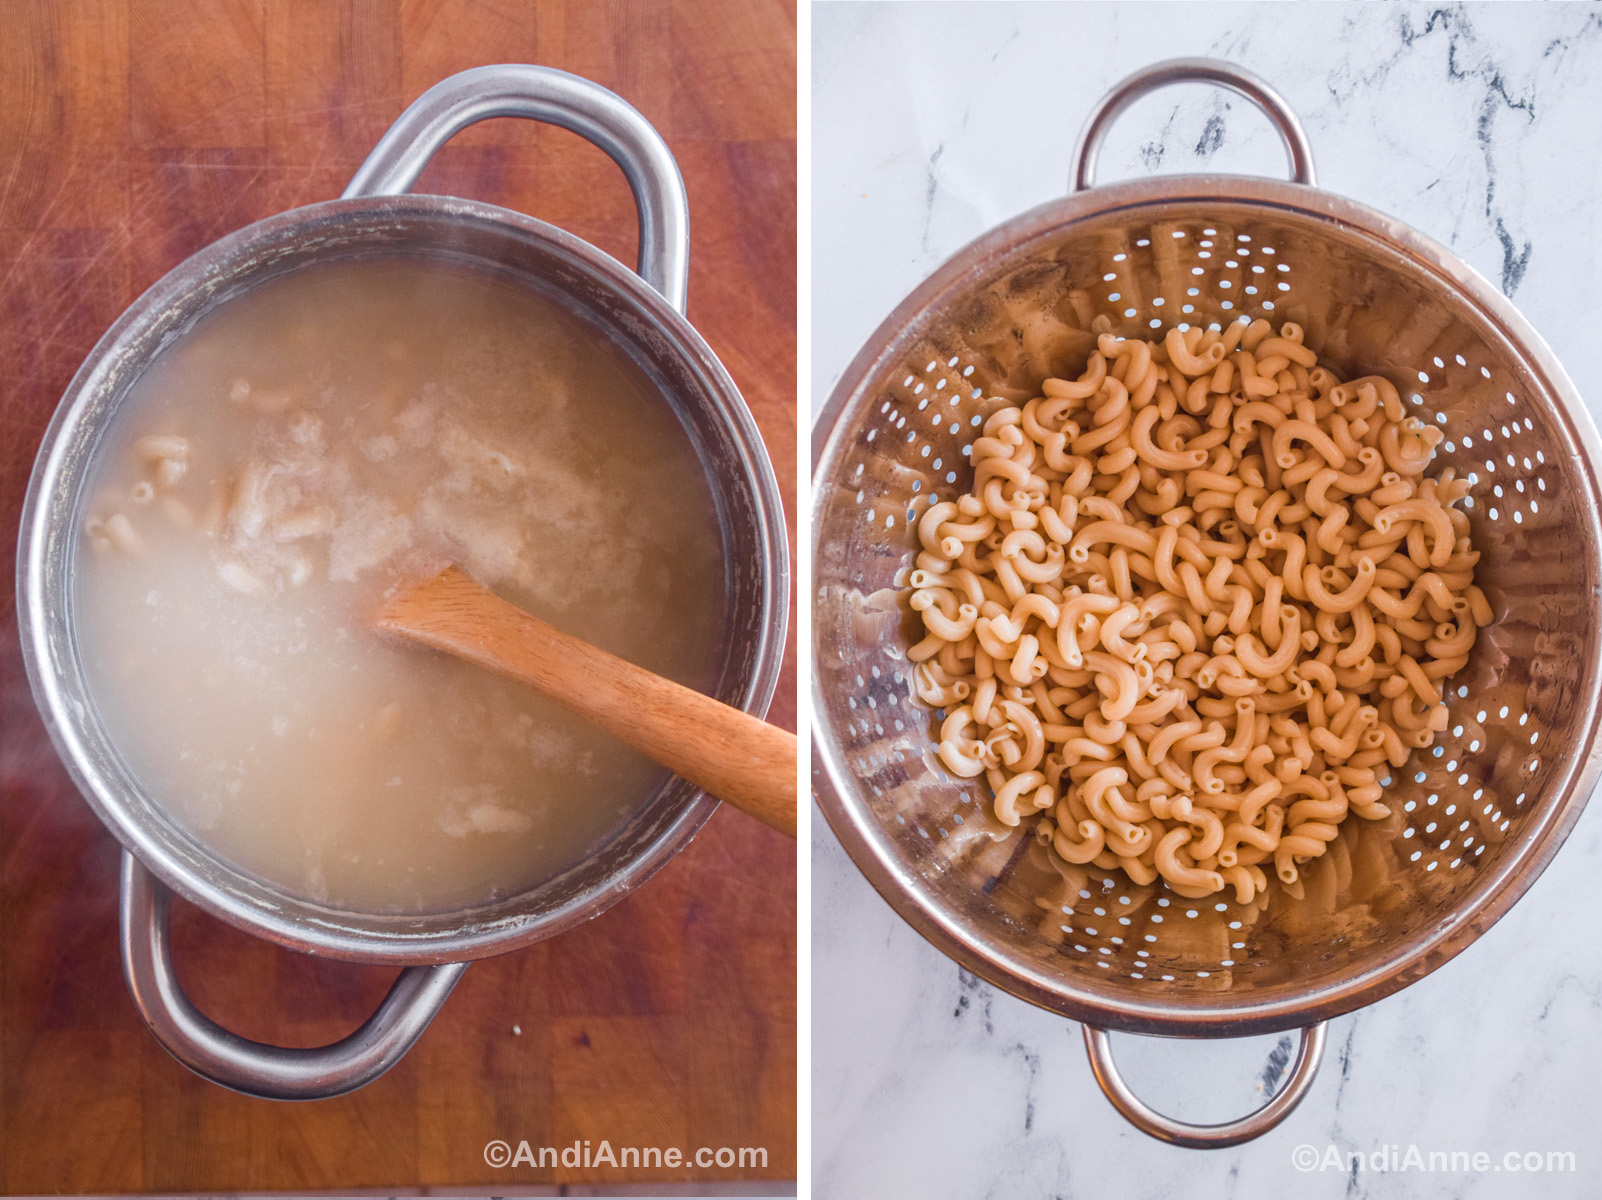 A pot with water and cooked pasta, and a strainer with cooked spiral pasta noodles.